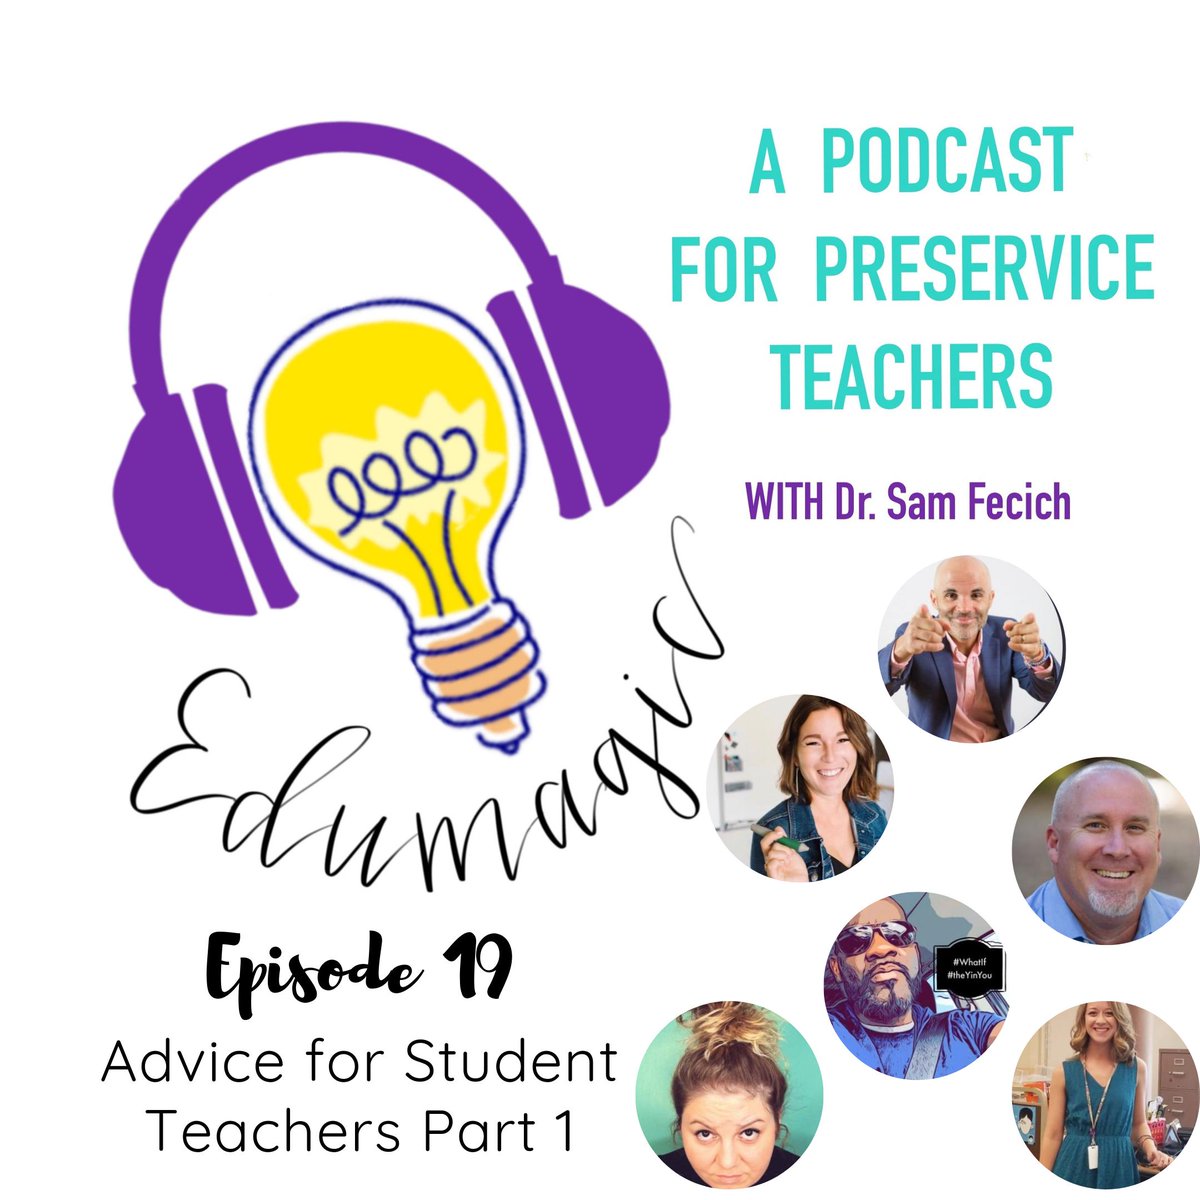 Advice for #studentteachers part 1 episode 19 of the #edumagic podcast 🎧 dropped! Tips from 
educators, admins, and eduspeakers are shared sfecich.com/podcast #edutwitter #edupodcasts #pstpln #otterbeinedtech